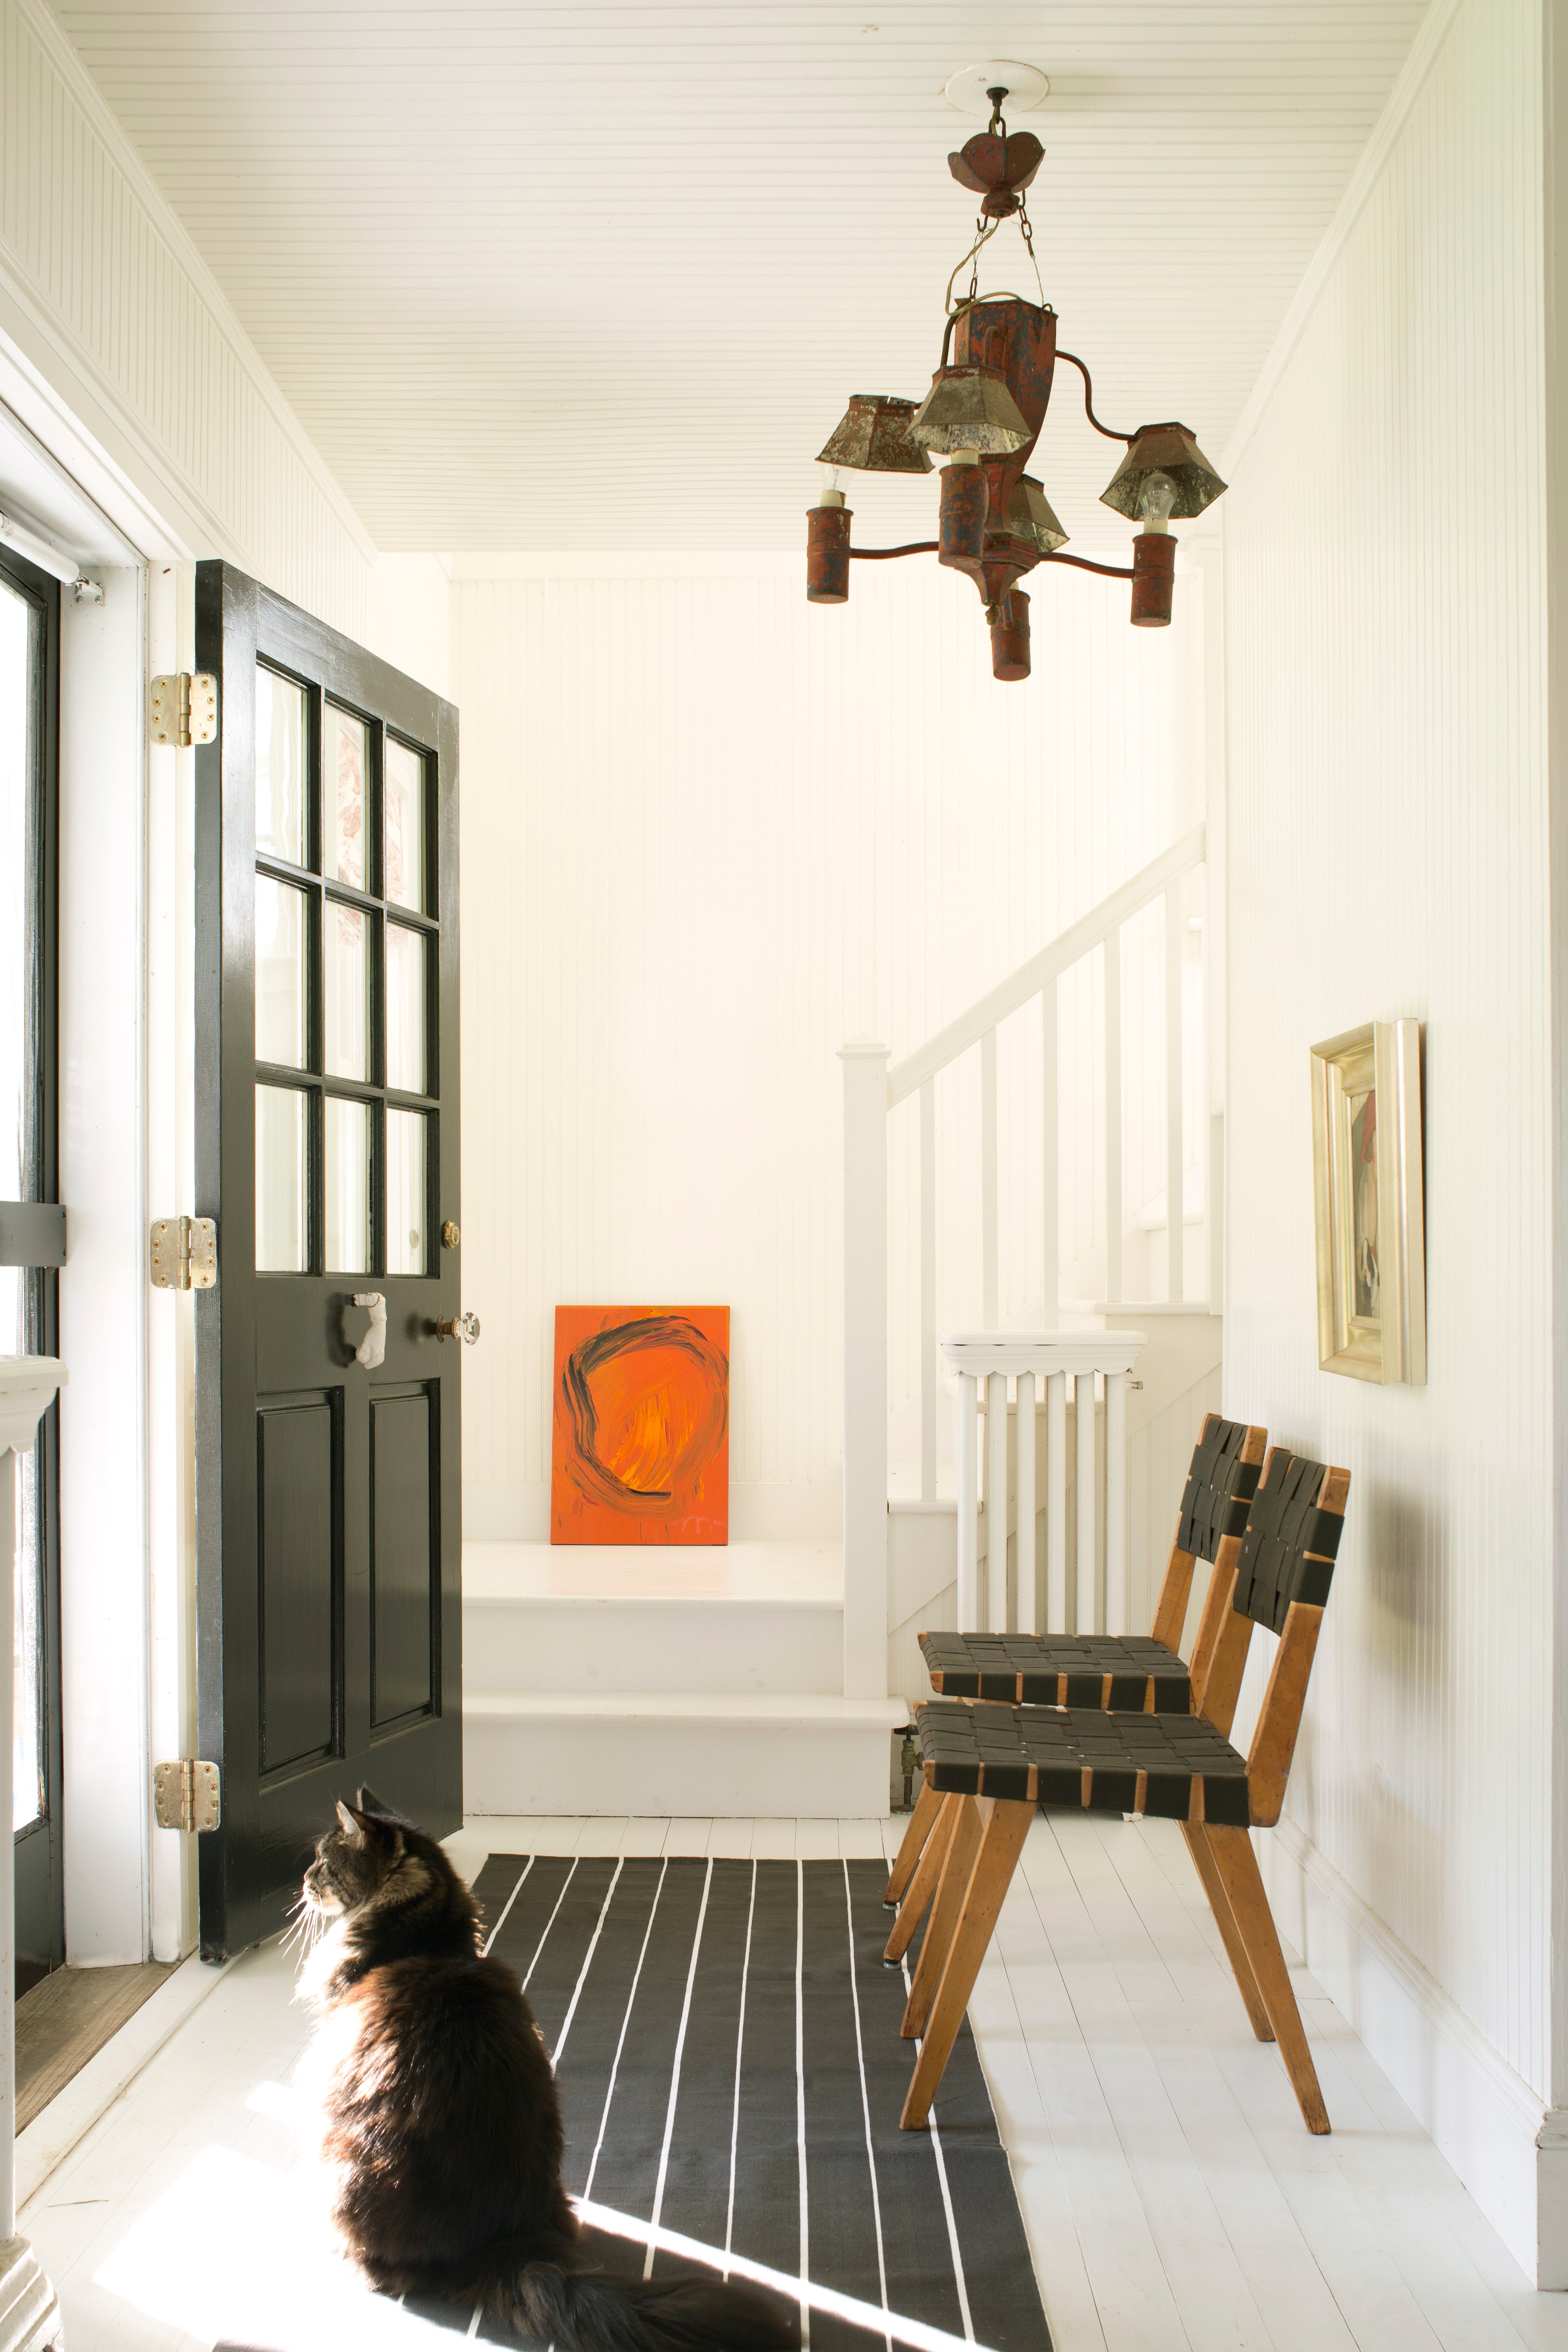 Benjamin Moore White Dove OC-17 is a bright, but warm paint color in a well-lit entrance